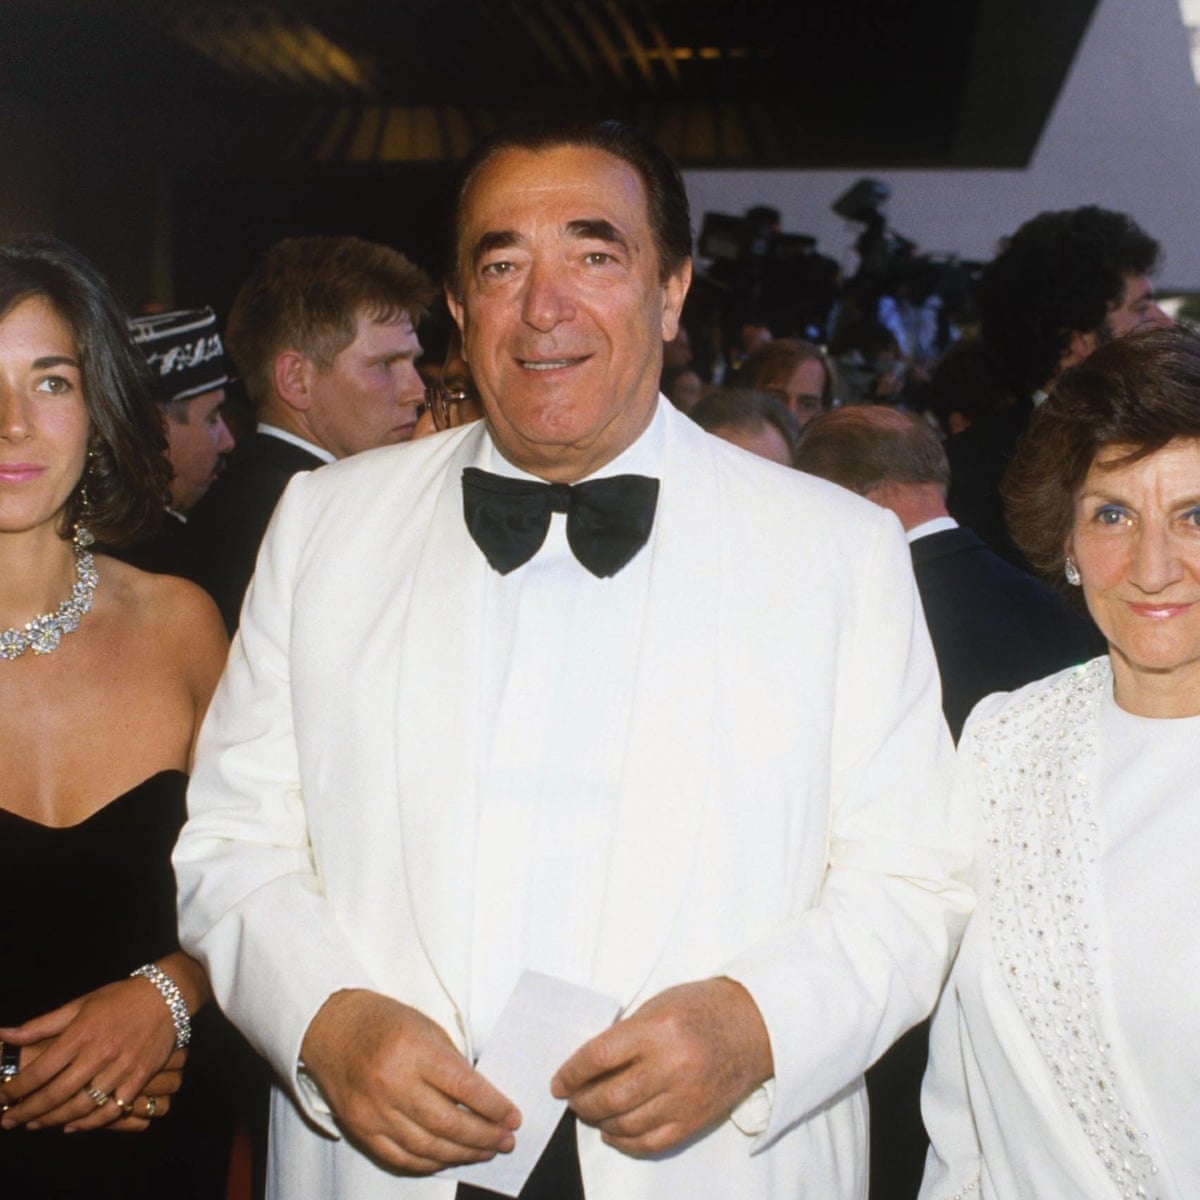 Kan weerstaan Situatie Agrarisch The murky life and death of Robert Maxwell – and how it shaped his daughter  Ghislaine | Jeffrey Epstein | The Guardian